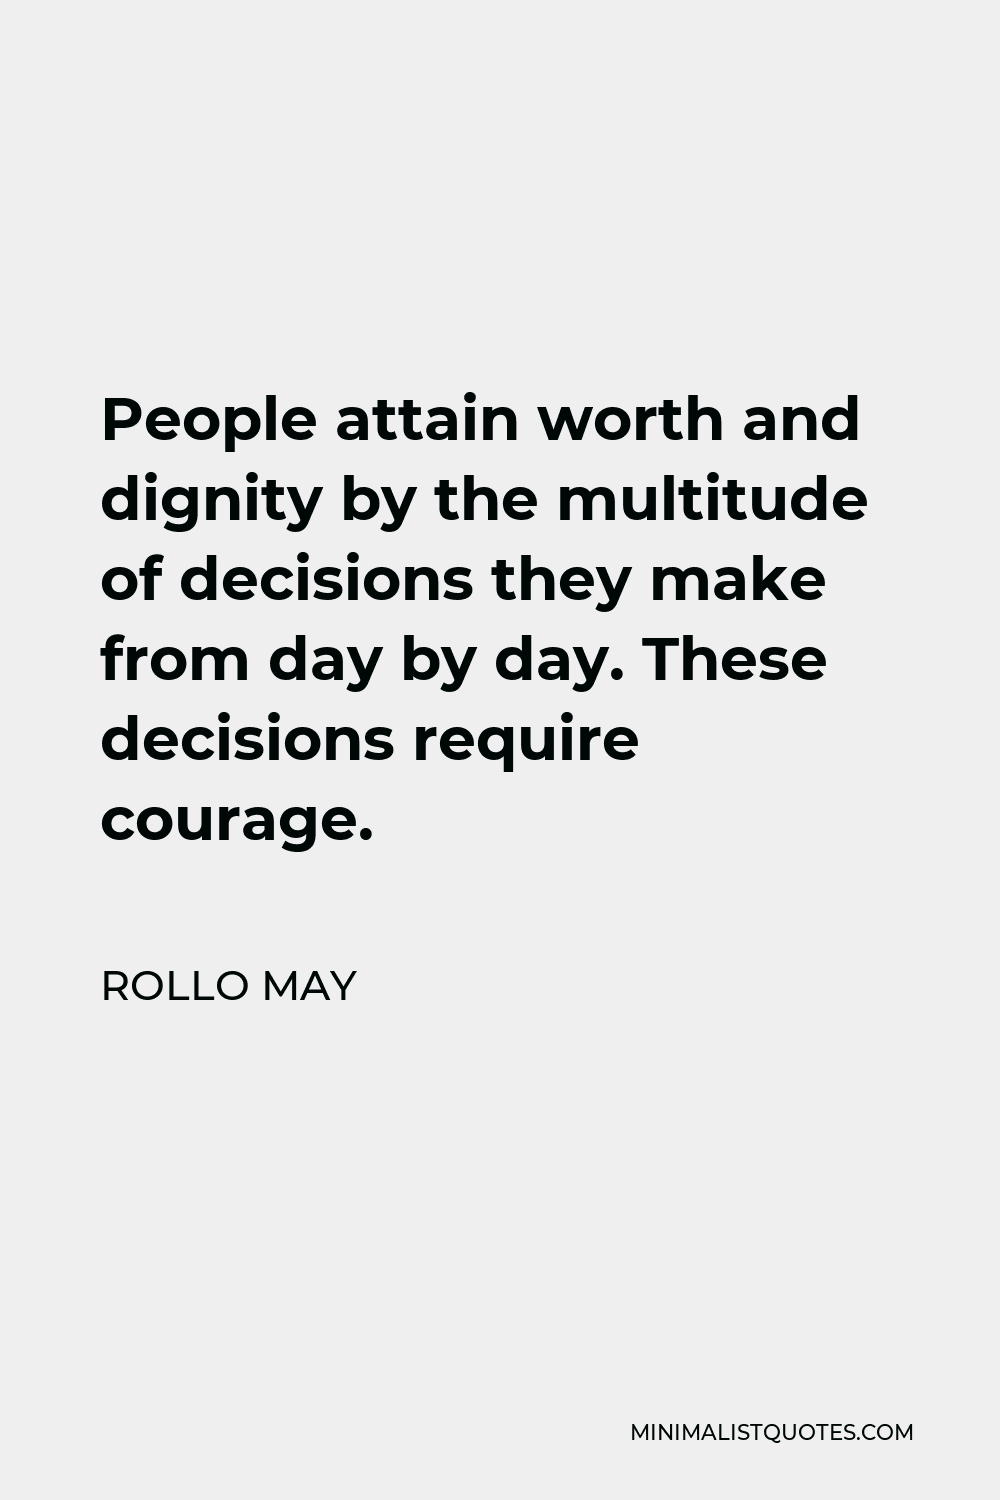 Rollo May Quote - People attain worth and dignity by the multitude of decisions they make from day to day.